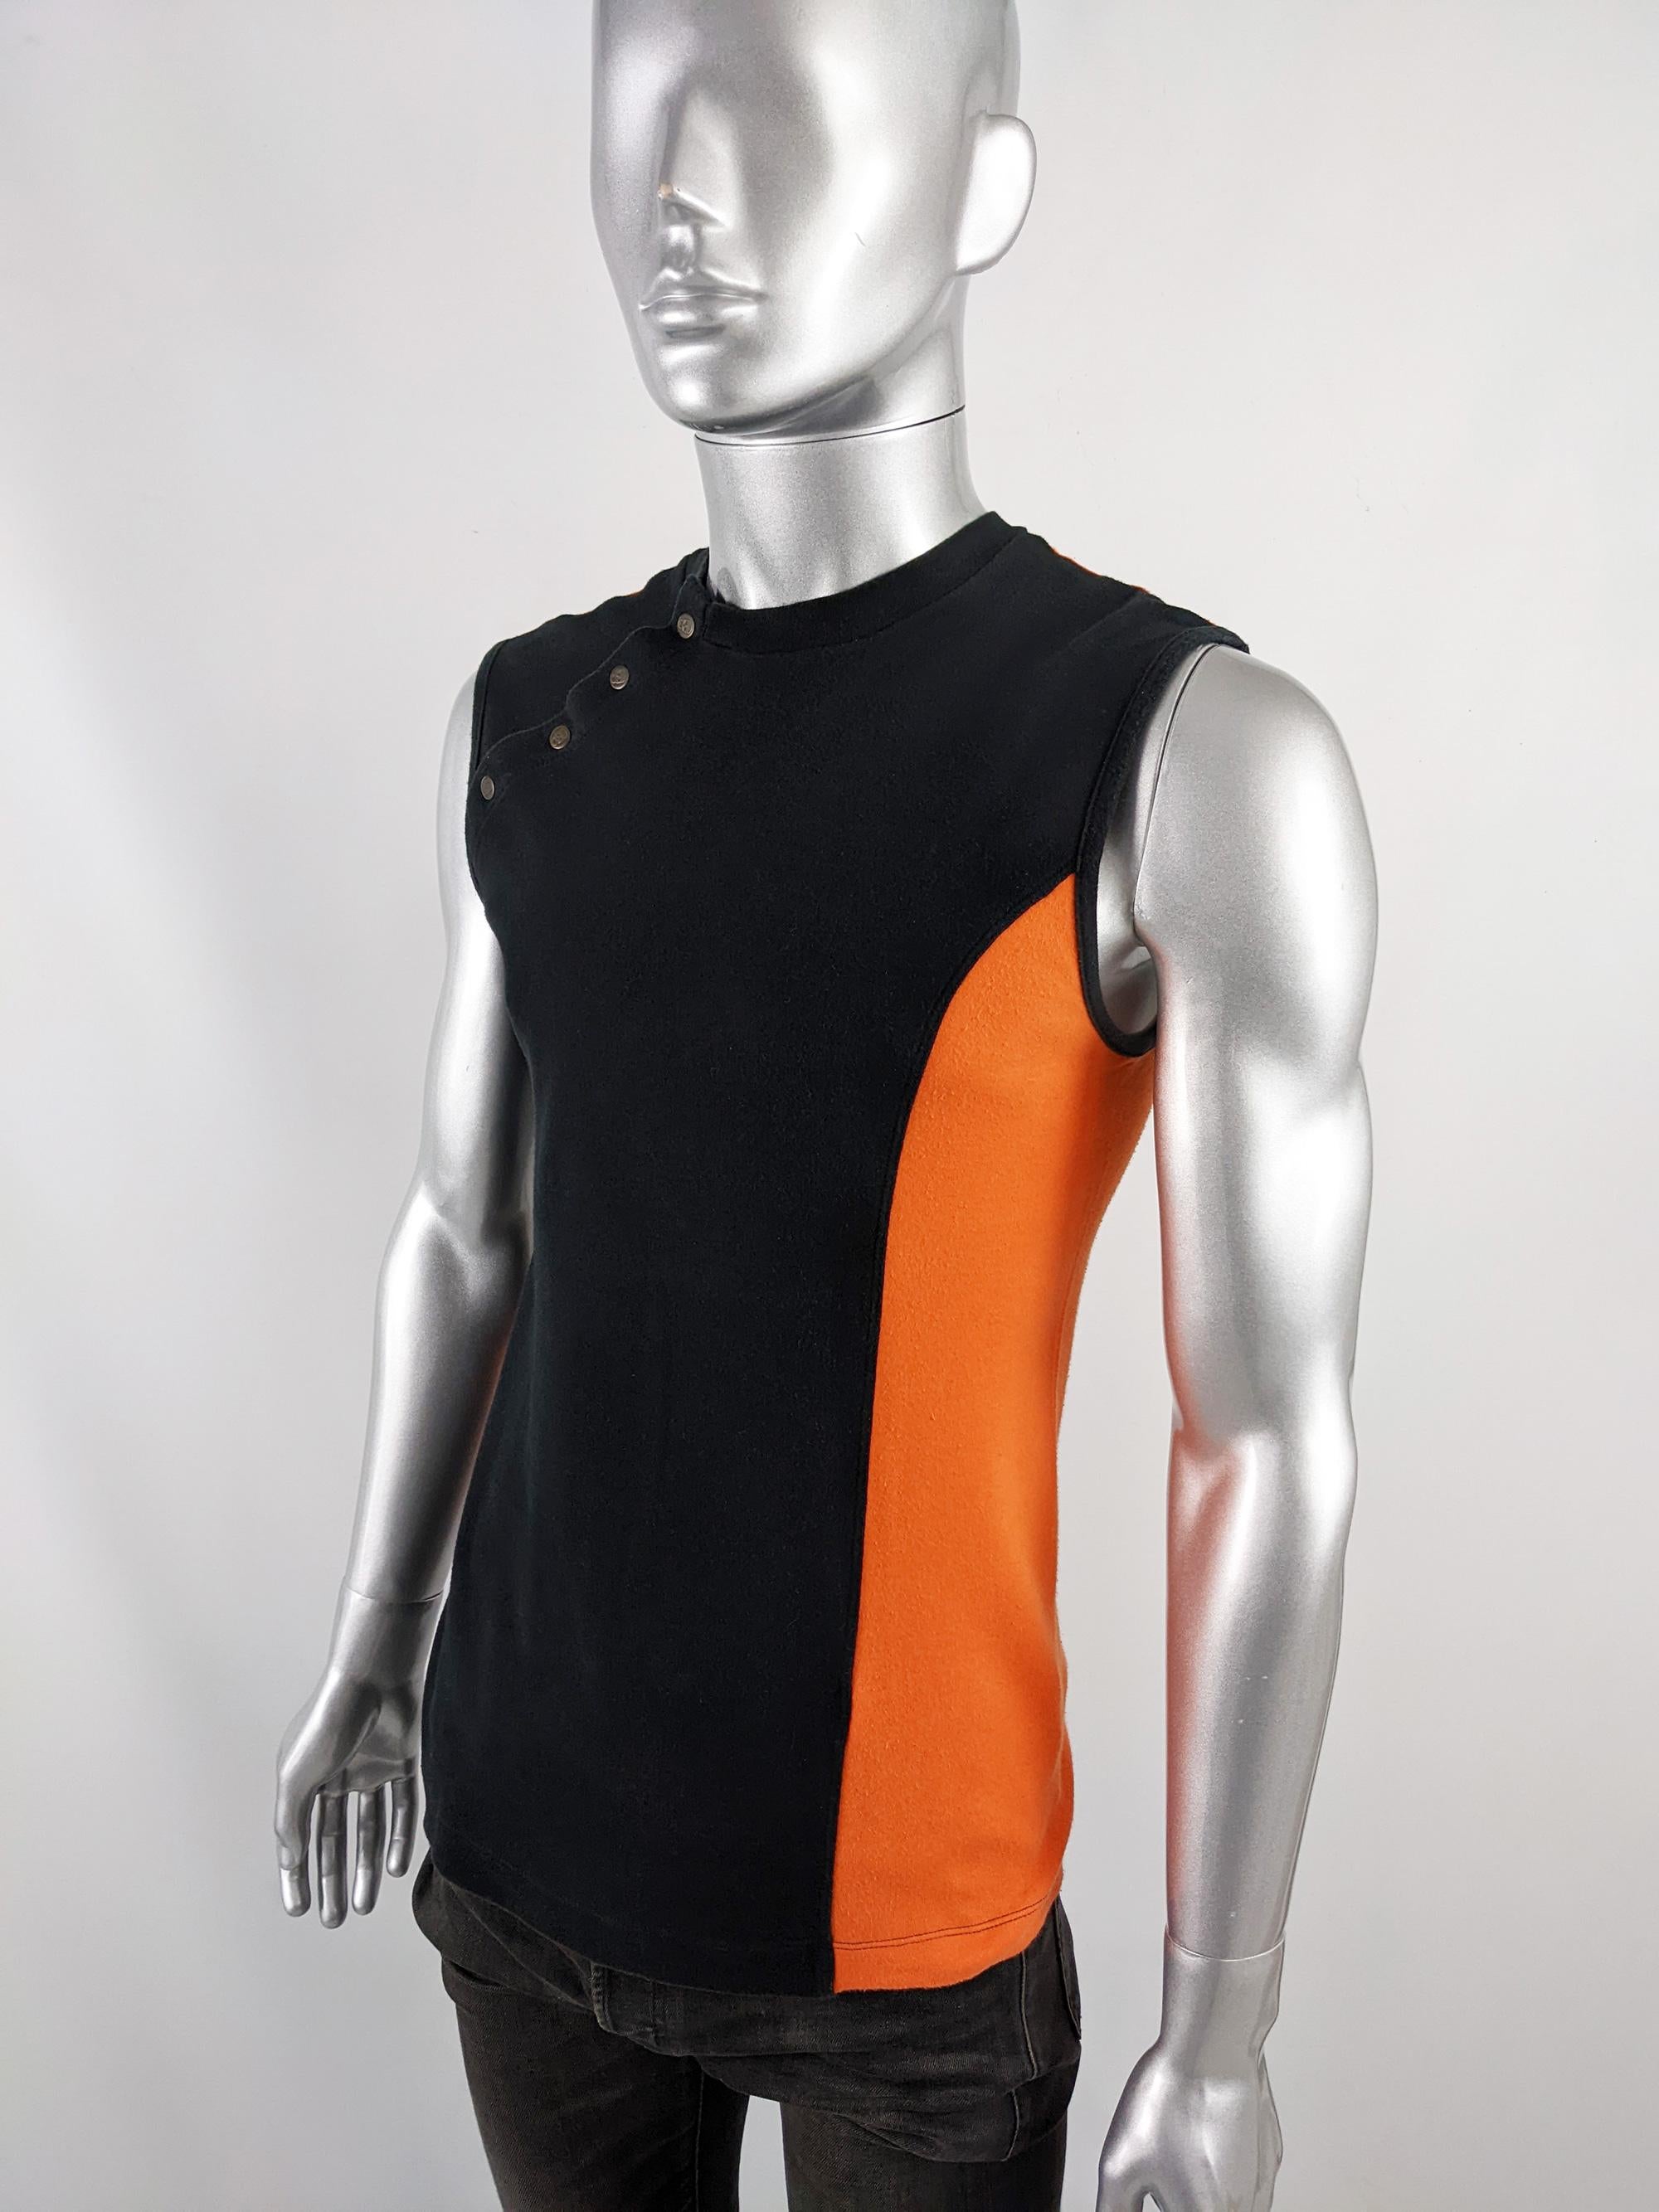 A sexy vintage mens sleeveless tshirt from the late 90s/ early 2000s by iconic Brazilian fashion designer, Alexandre Herchcovitch, know for his avant garde designs and cult clubwear clothing. This tank top is a great example, with his skull emblem